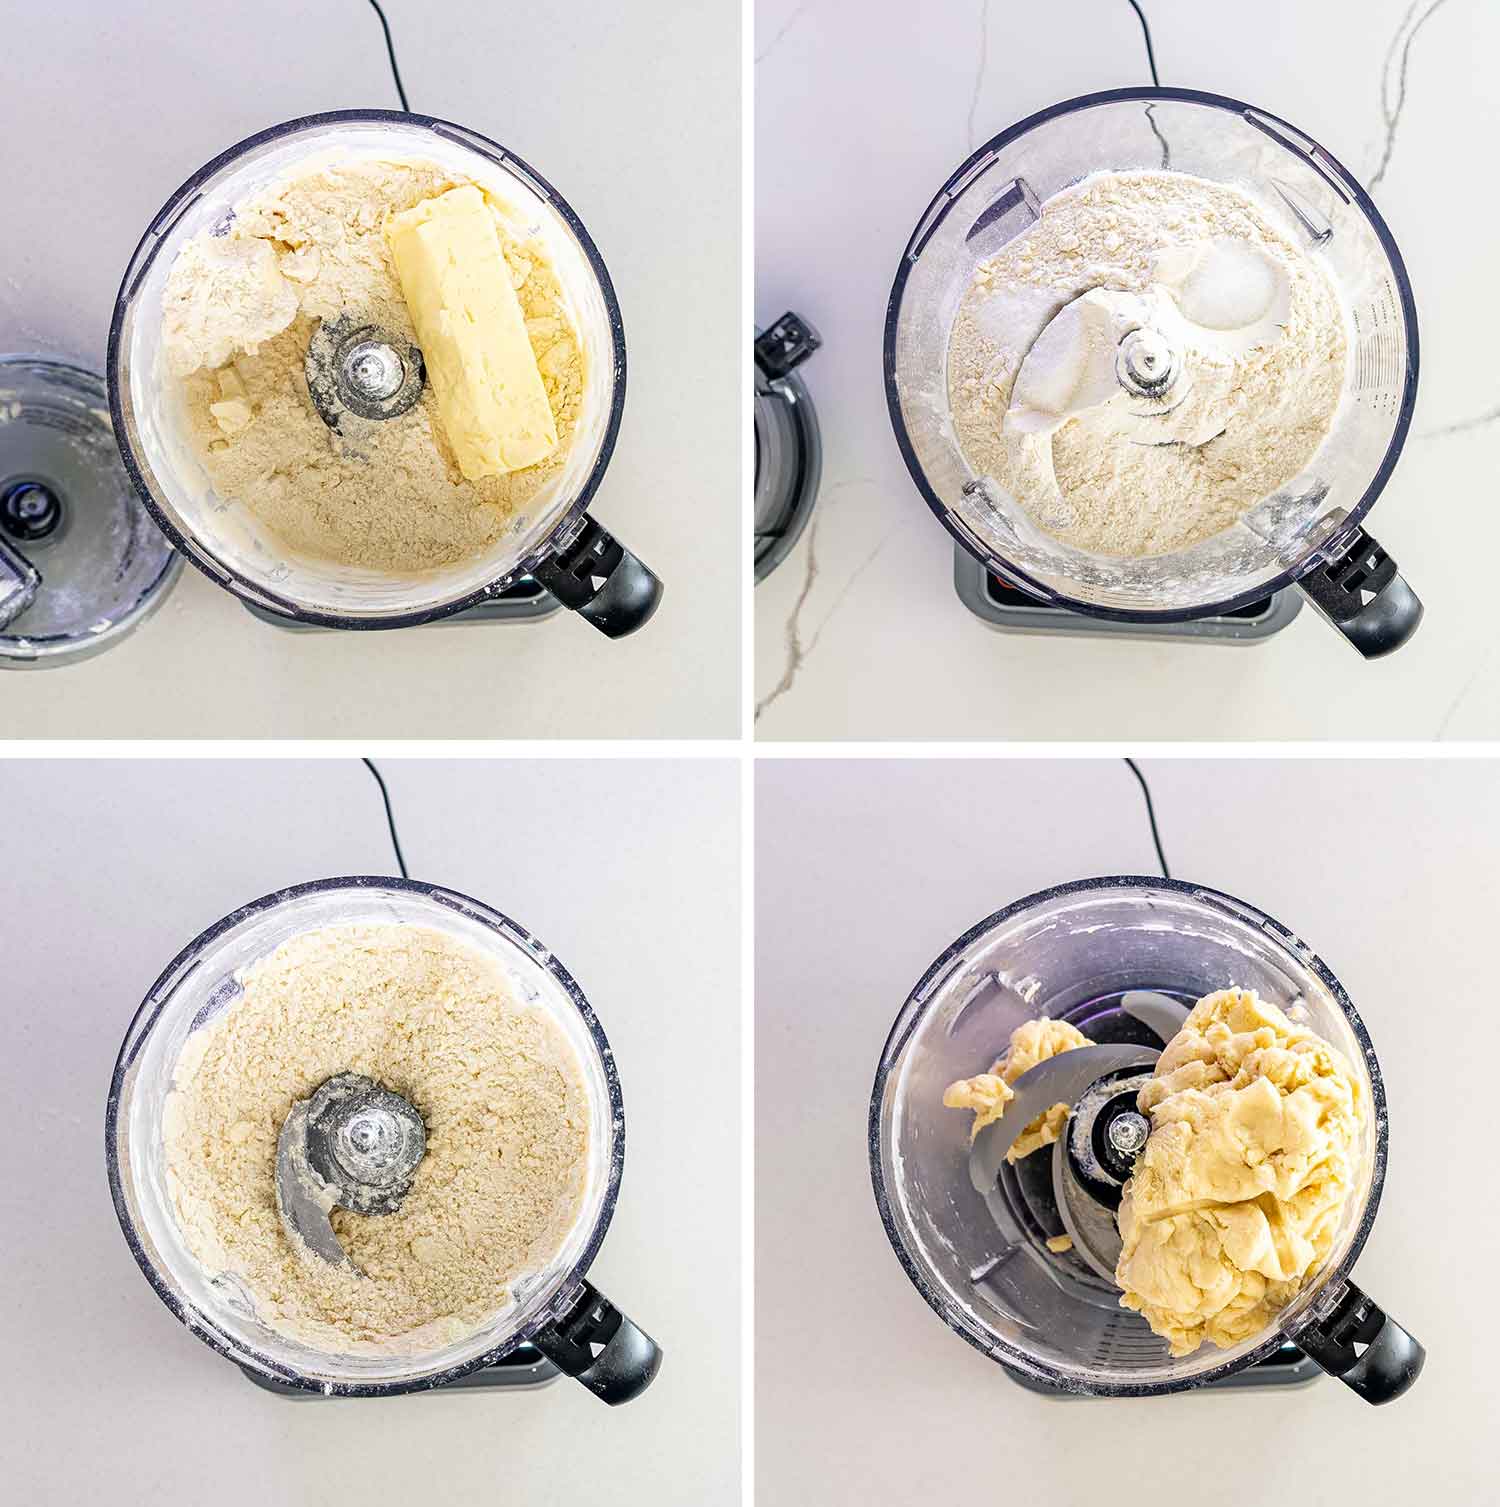 process shots showing how to make pie crust in the food processor.